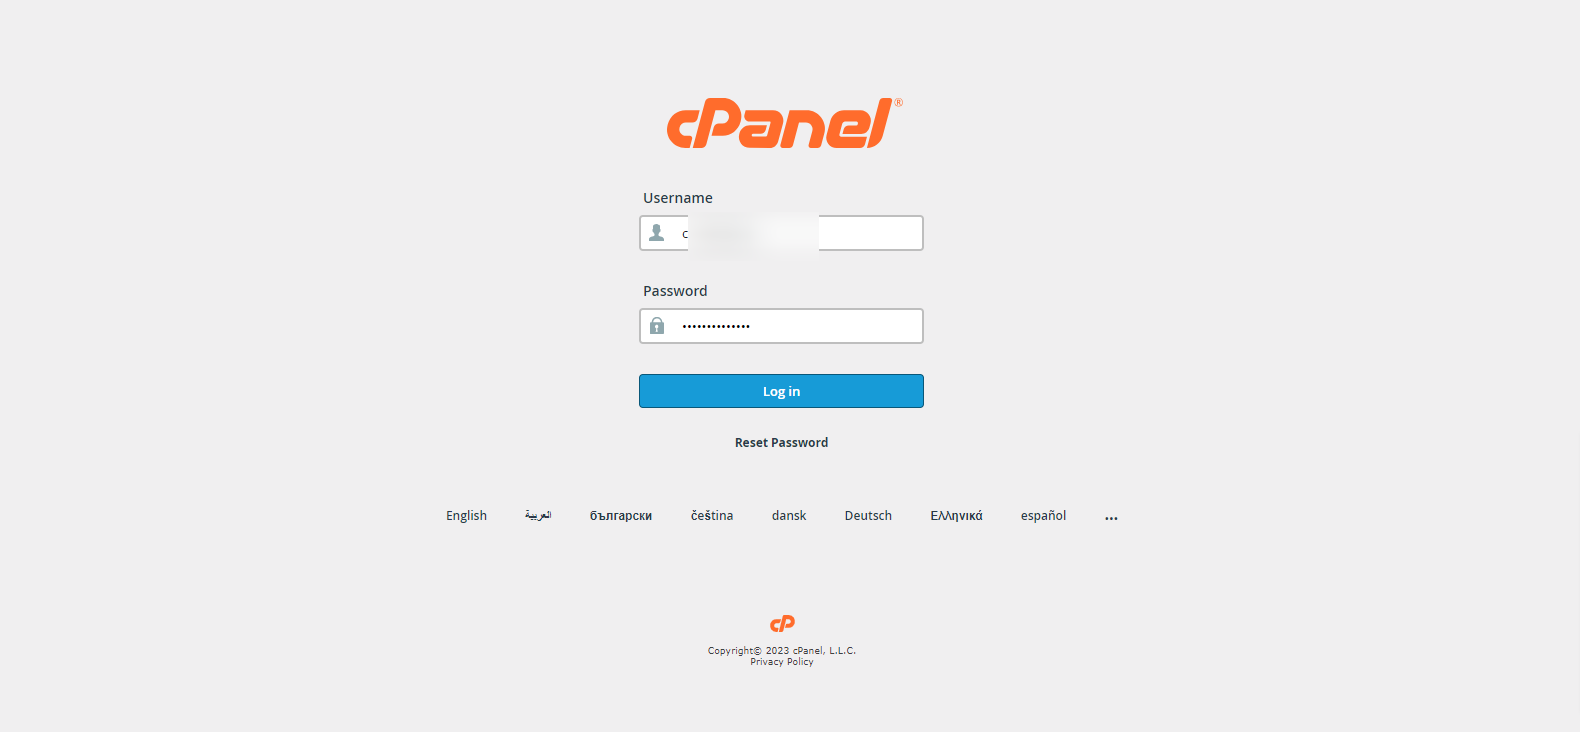 how to Add Domain in cPanel: login to your cPanel account